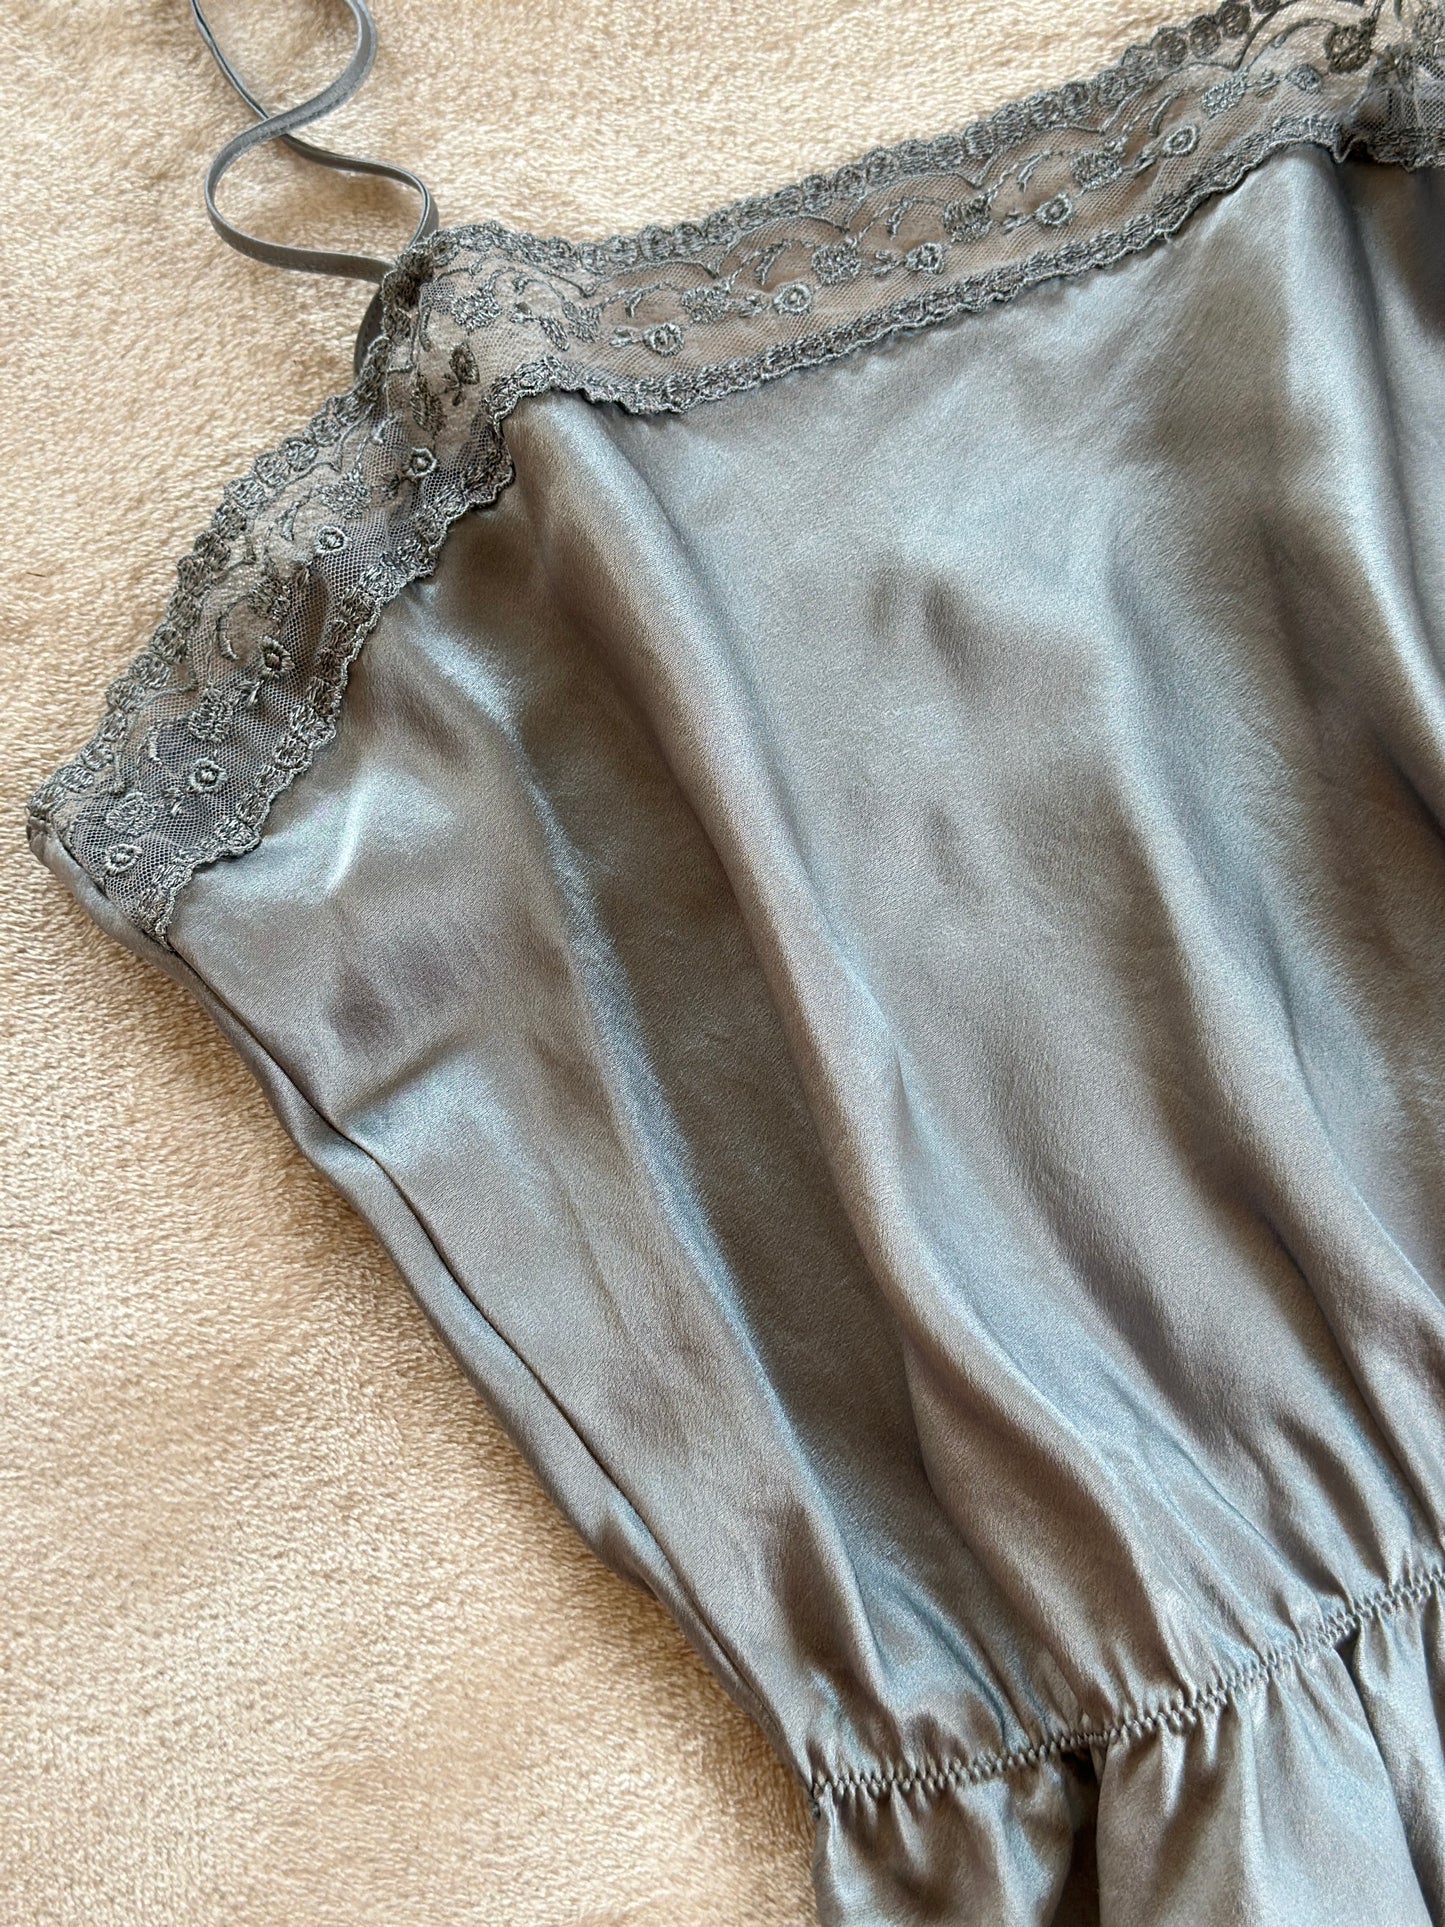 Vintage silk top with lace